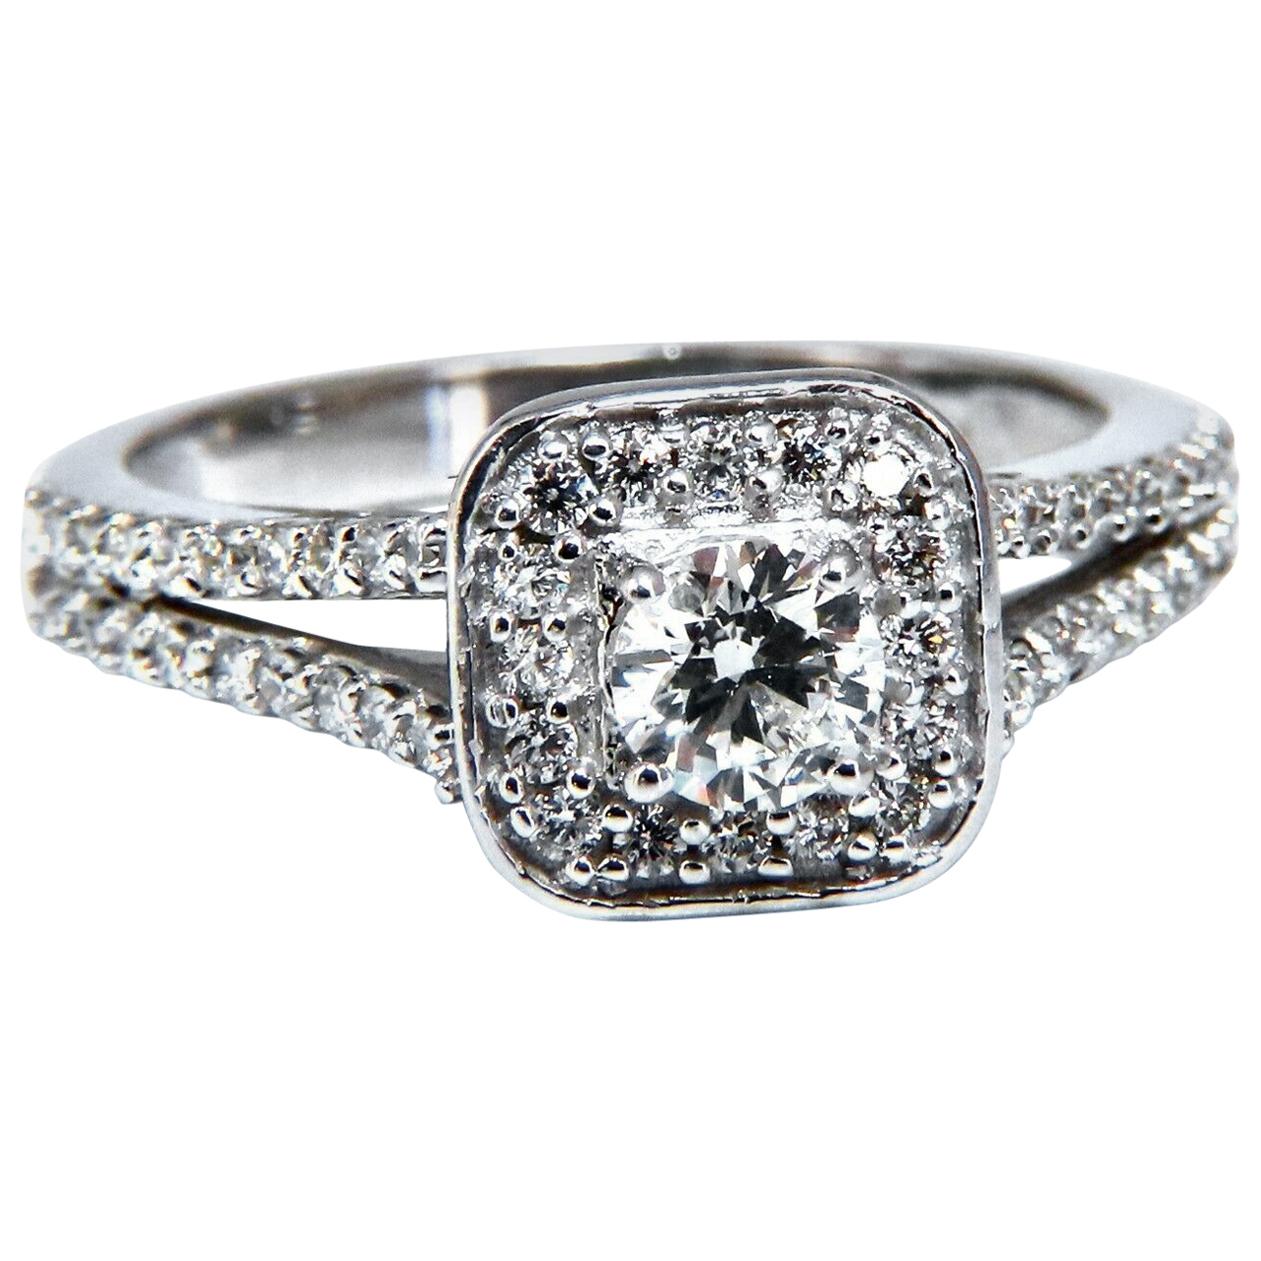 Double Shanked Diamond Mod Ring
.40ct. Natural round center diamond

H-color Si-1 clarity

.55ct side round diamonds, channel mounted.

Vs-2 clarity  G/H color.

14kt white gold.

4.3 Grams

Overall ring: 9.3mm

Depth: 9mm

Current ring size: